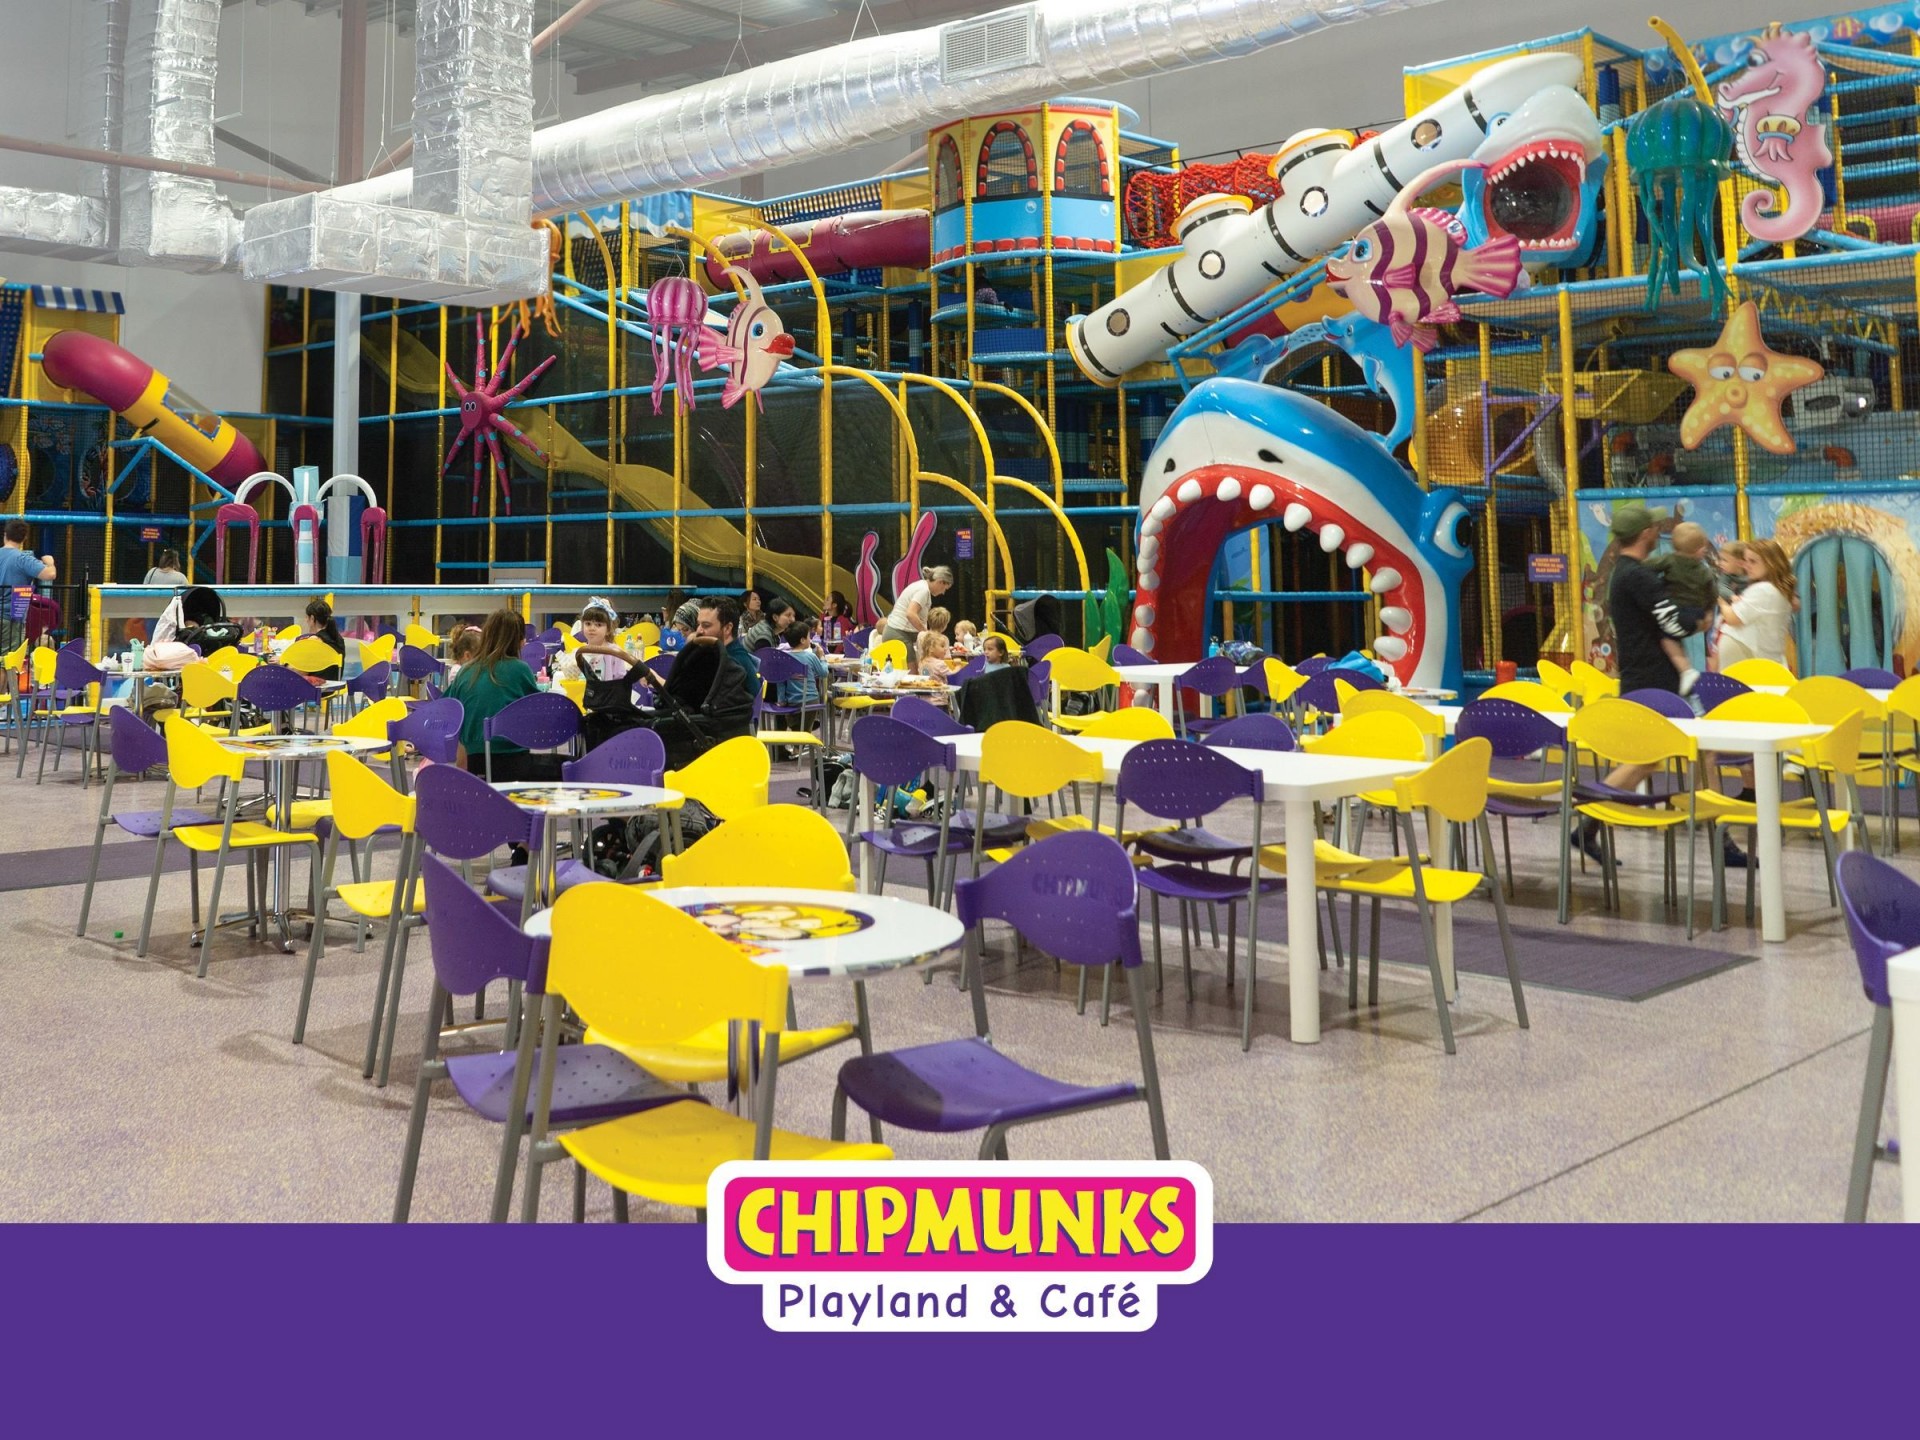 Chipmunks indoor playground franchise for...Business For Sale